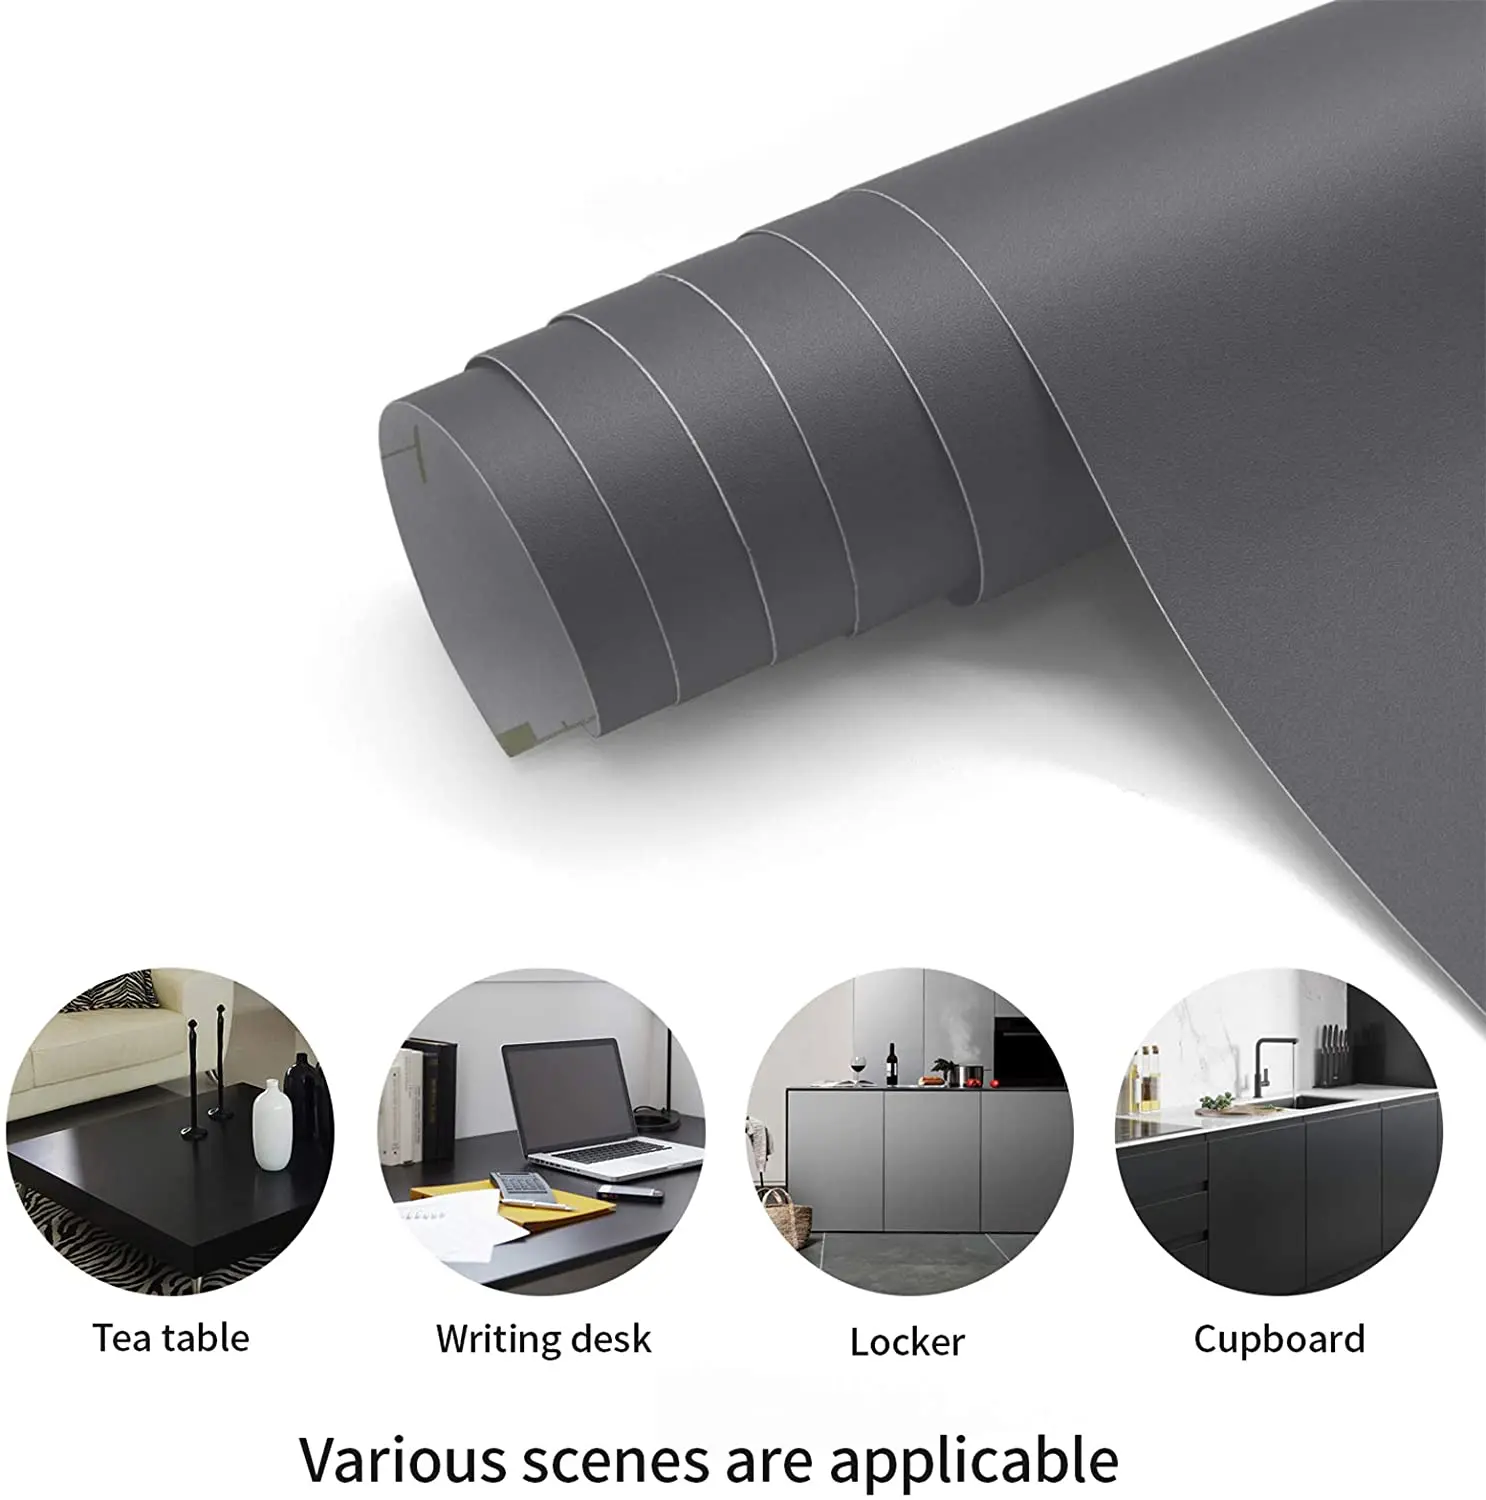 PVC Wallpaper Decoration Vinyl Matte Black Self-adhesive Paper,  Bedroom Furniture Wall Hanging Waterproof Kitchen 60x 5M kitchen faucet brushed gold pull out kitchen tap black pull down kitchen mixer rotating sink faucet mixer tap sus 304